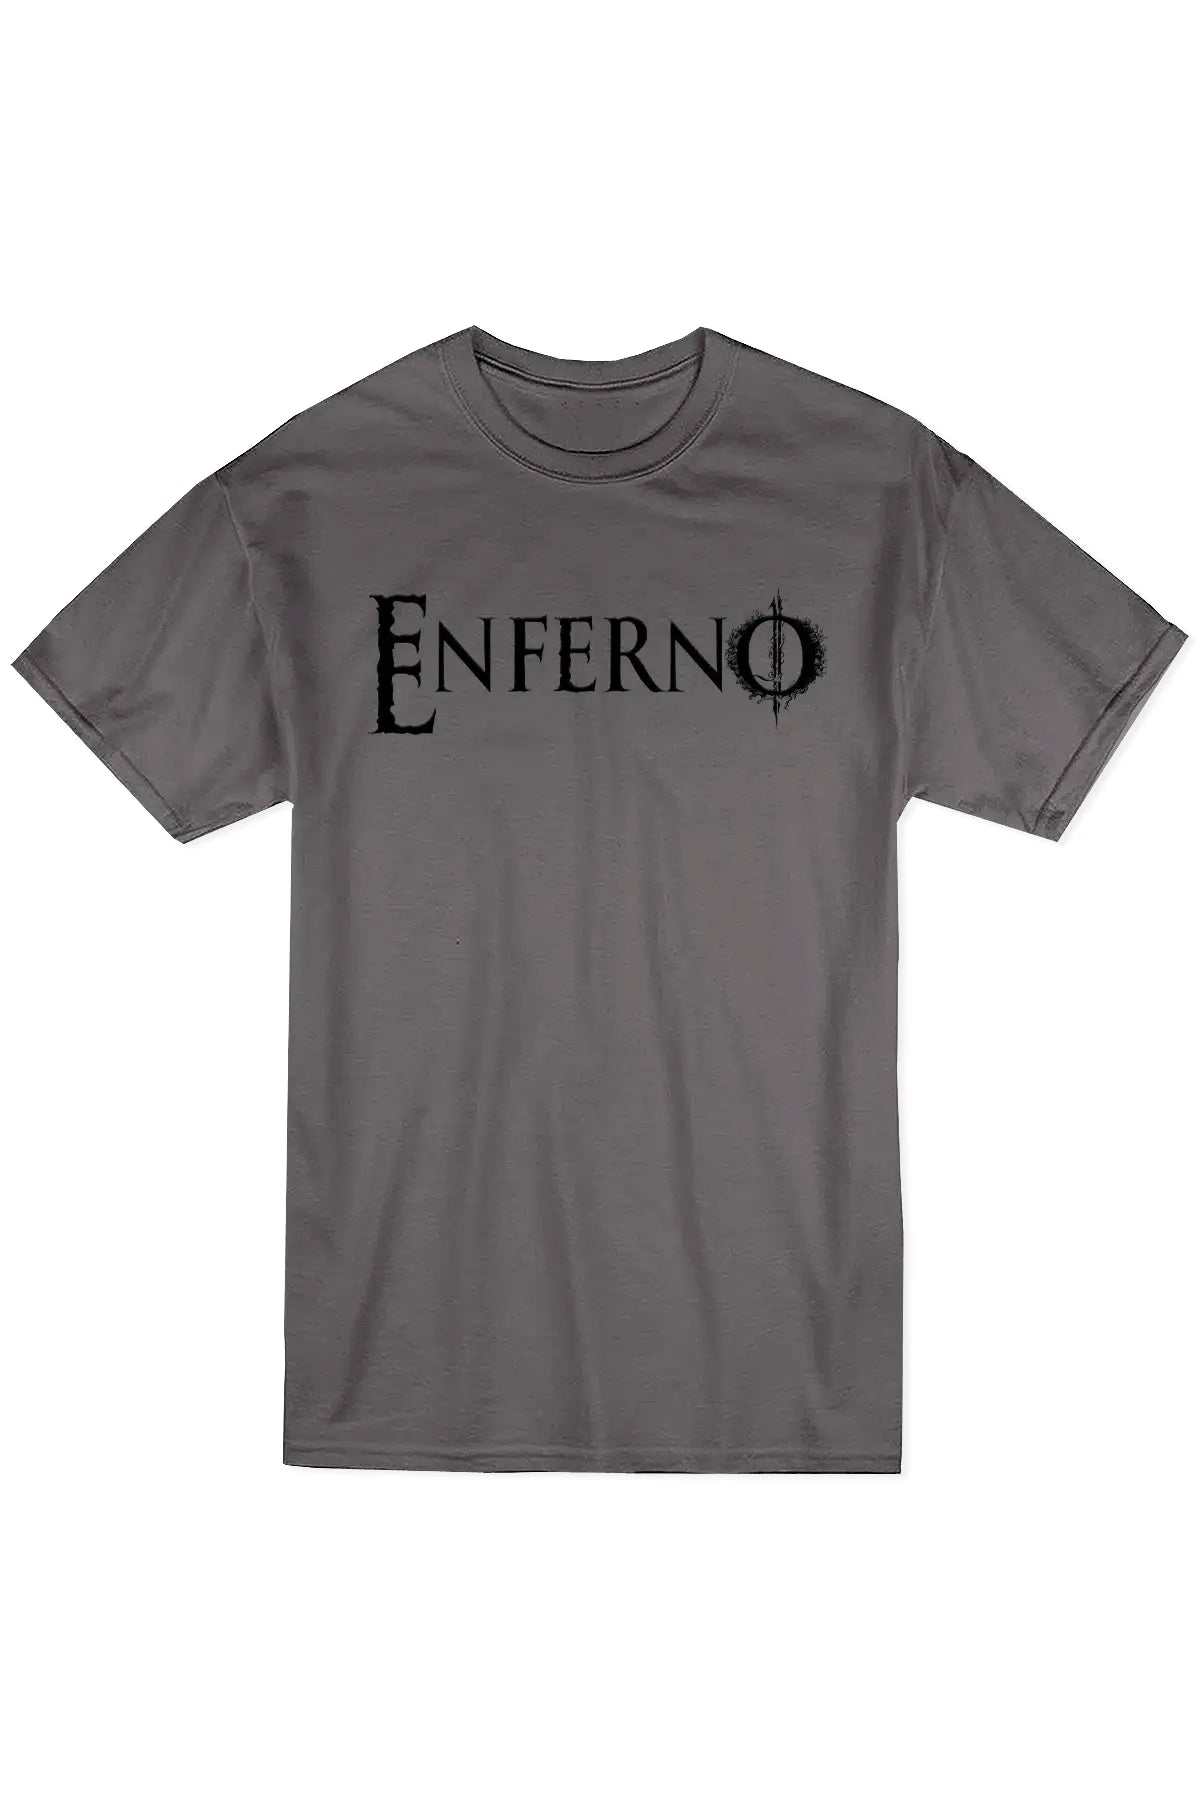 Enferno Classic Logo Tee in Pepper.